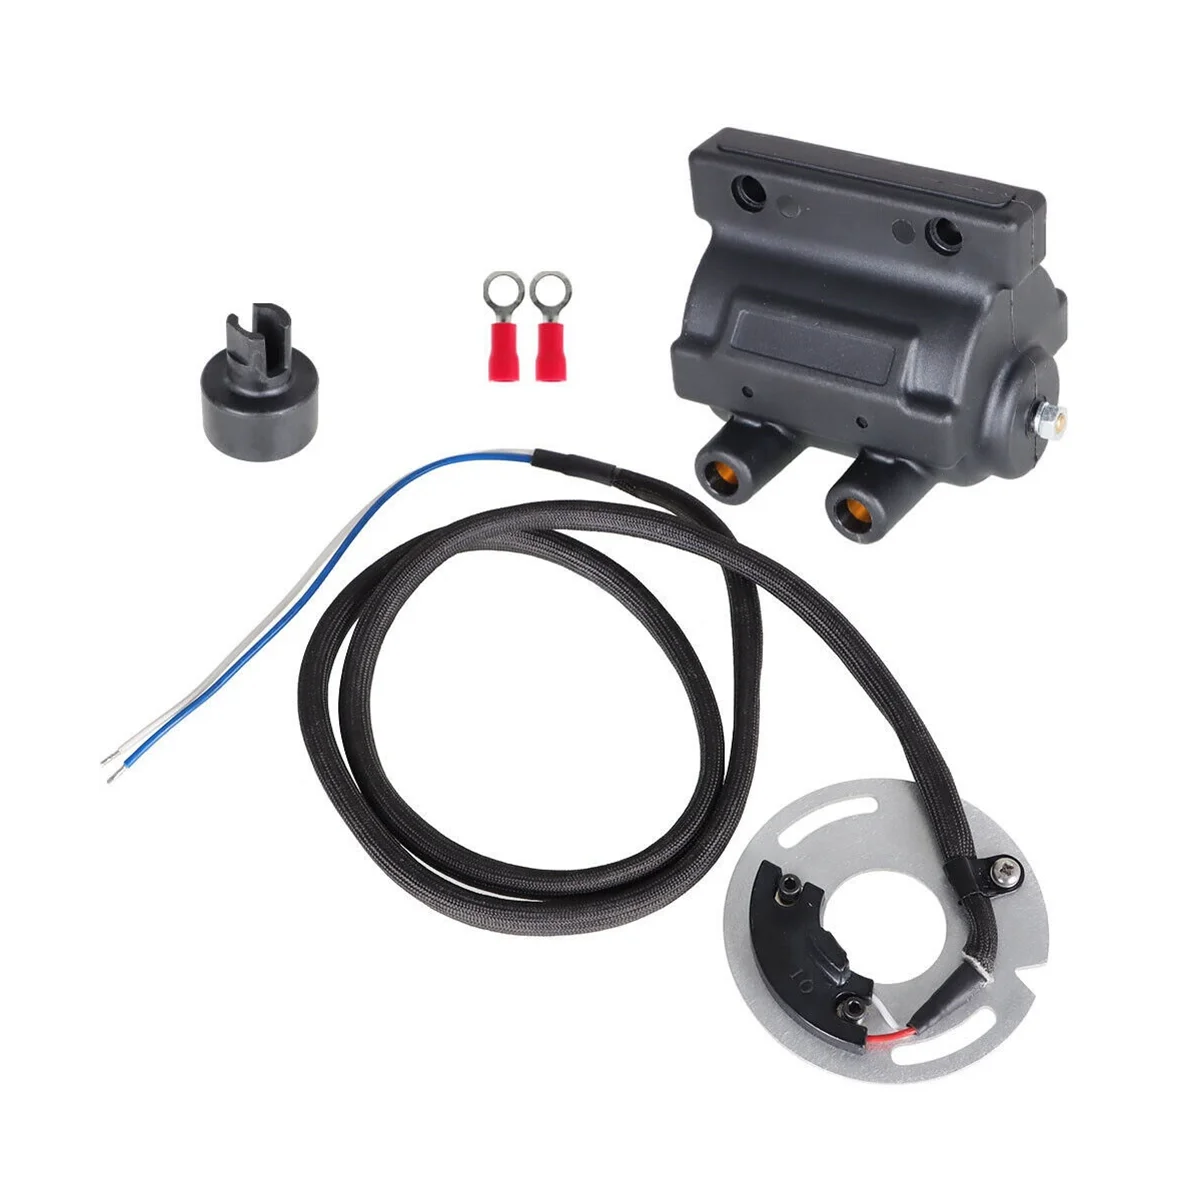 

Dsk6-1 Ignition Coil High Performance Ignition System with Coil with DC7-1 Coil Set for Big Twin 1970-1999